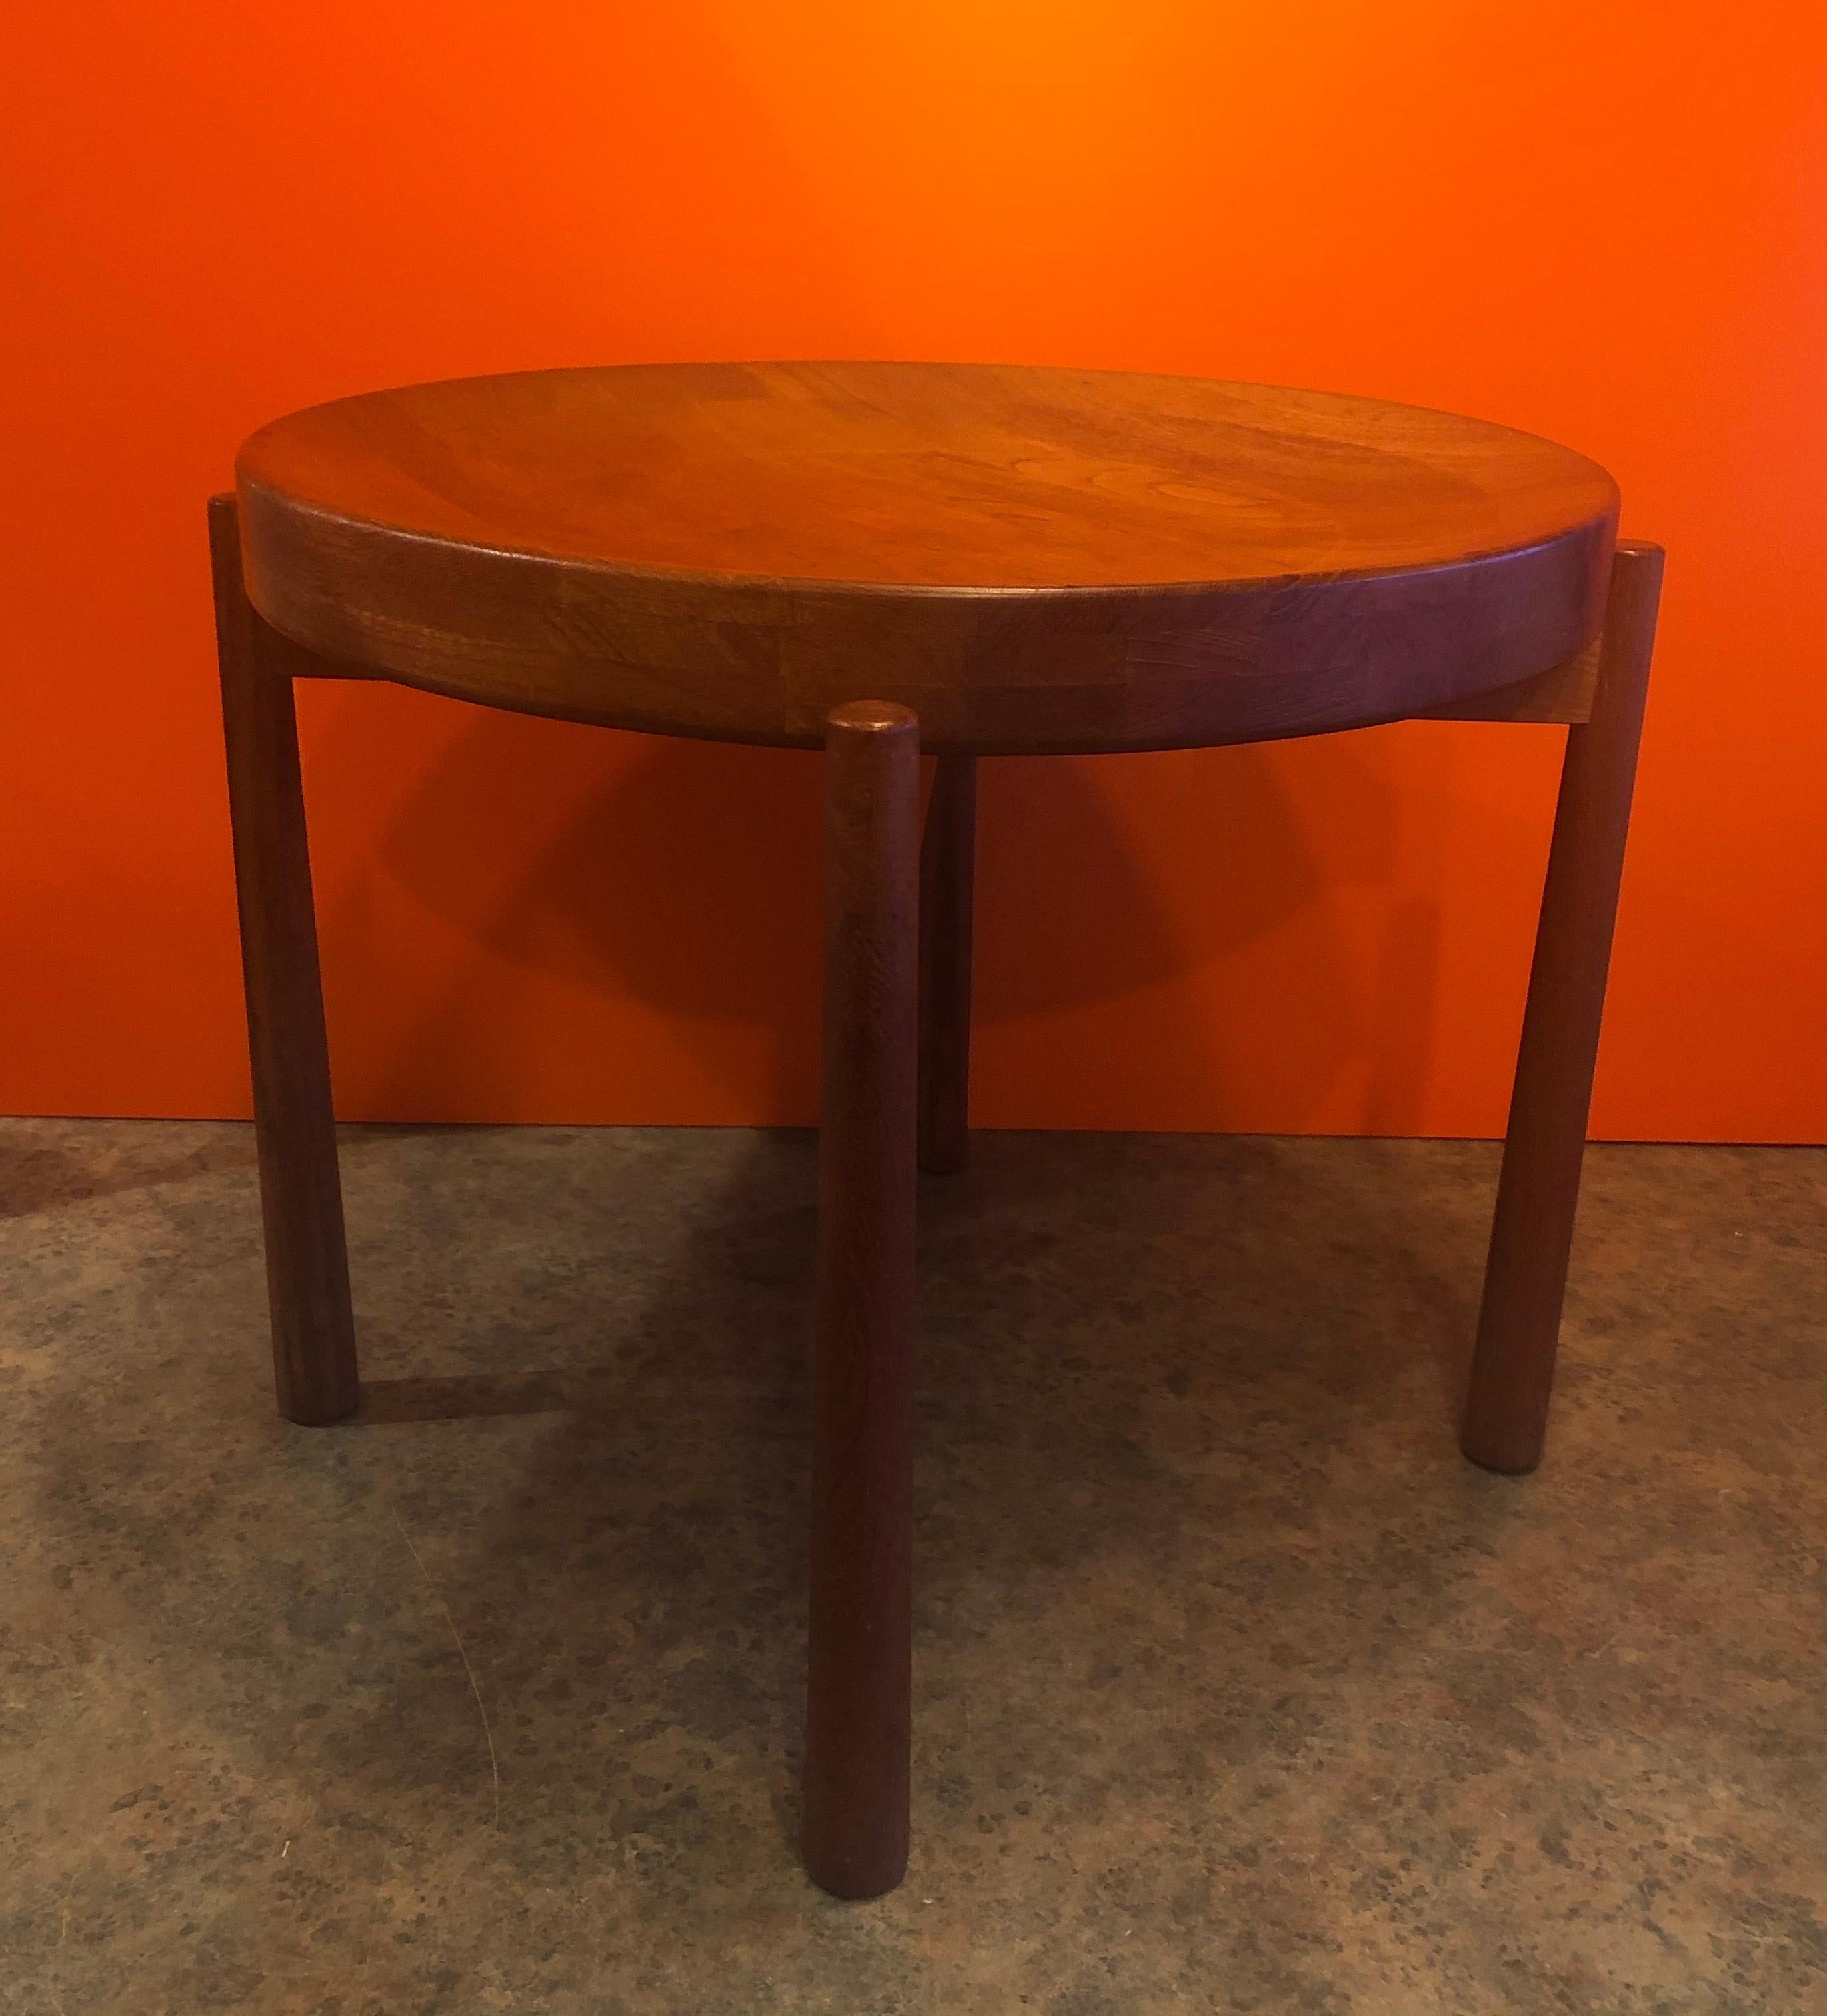 Side Table or Fruit Bowl Attributed to Jens Harald Quistgaard for DUX of Sweden For Sale 6